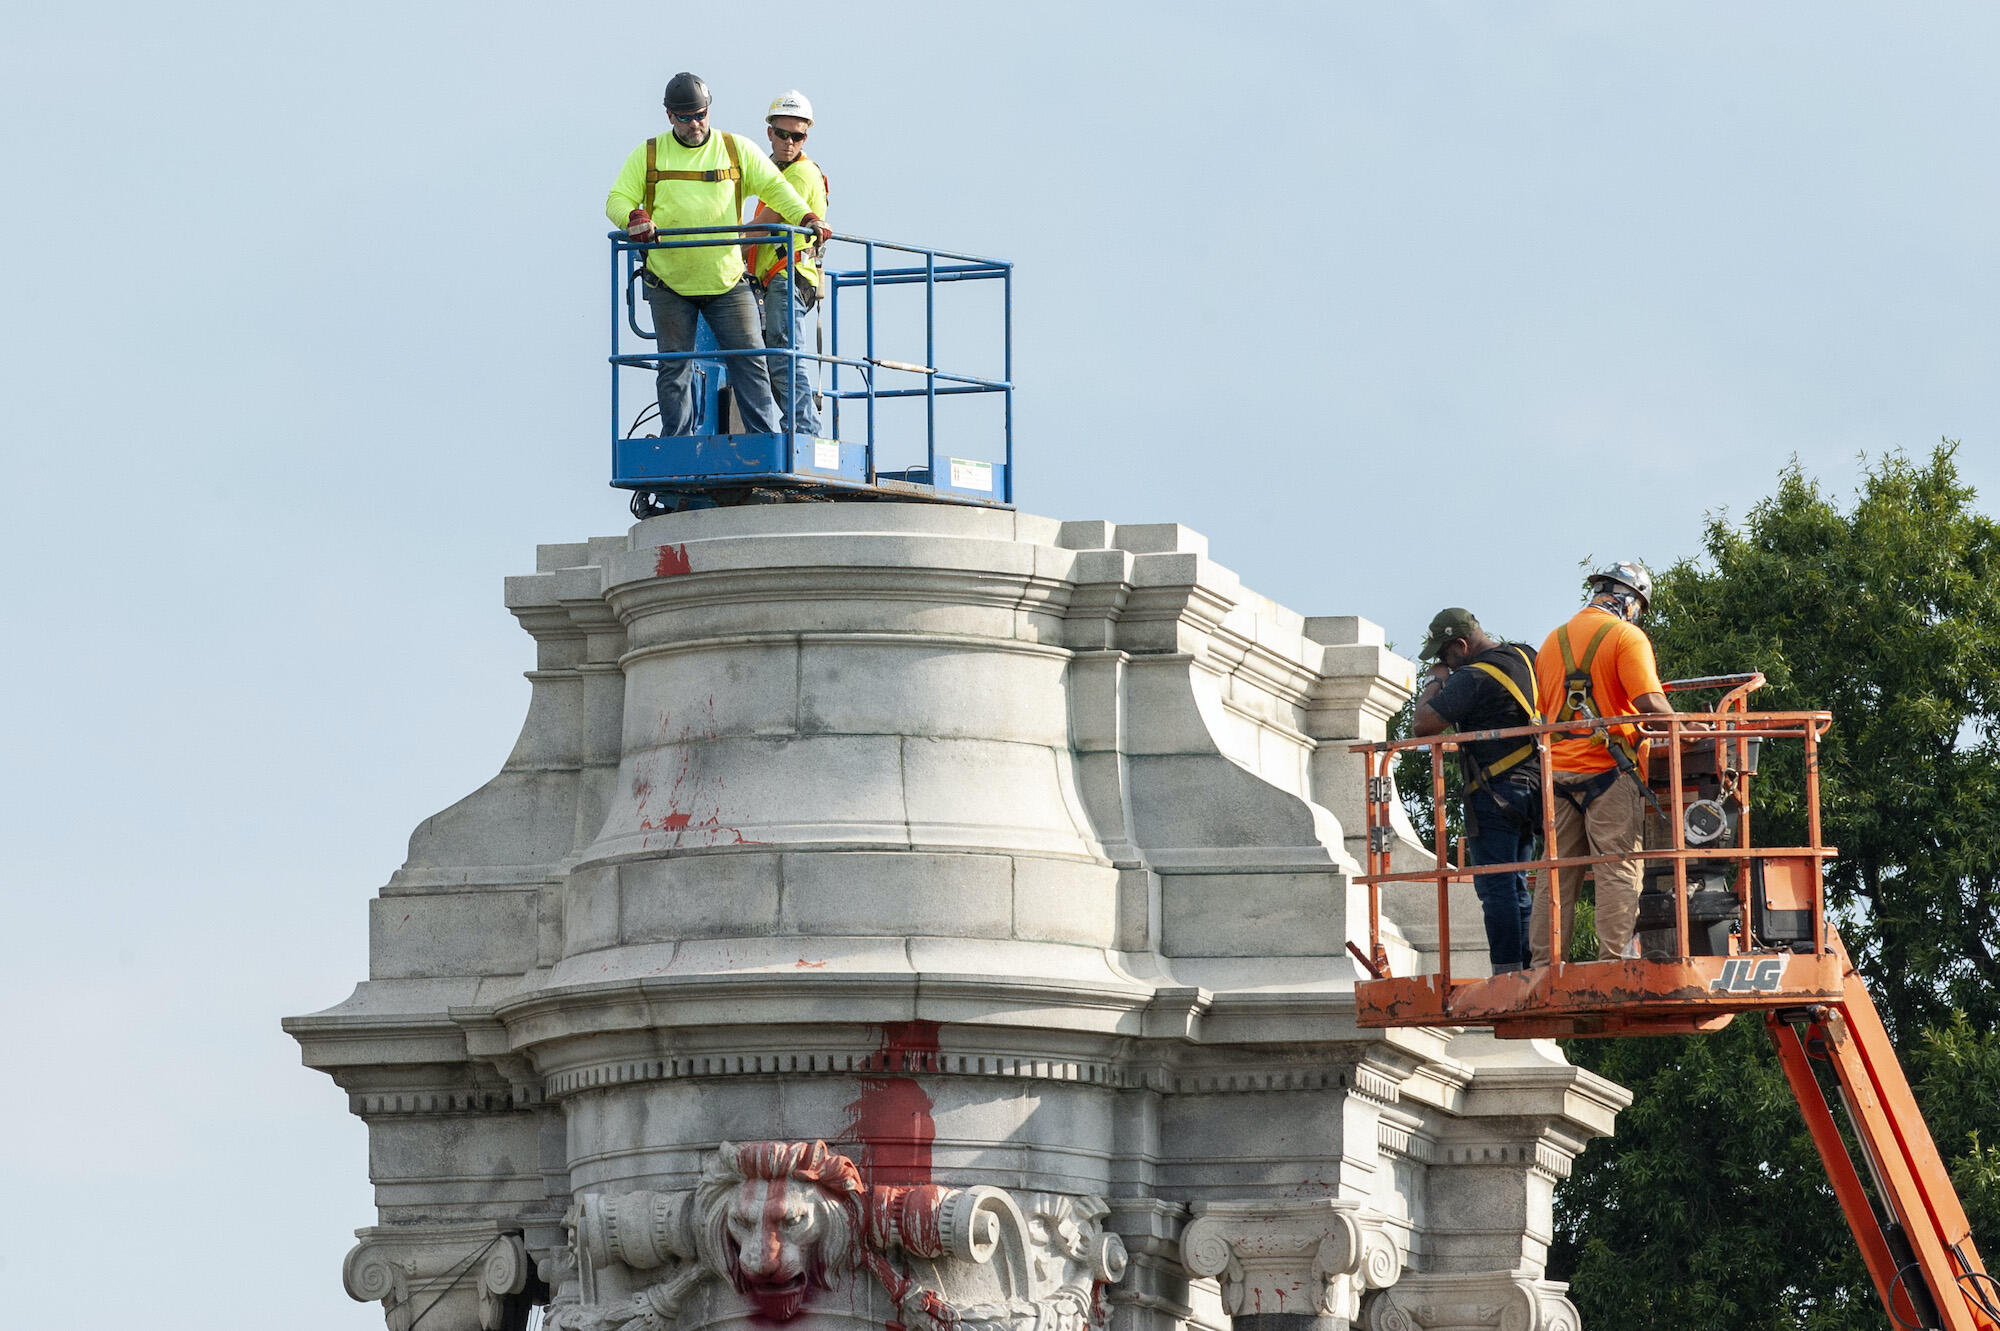 Workers atop the empty pedestal after the Robert E. Lee statue is removed